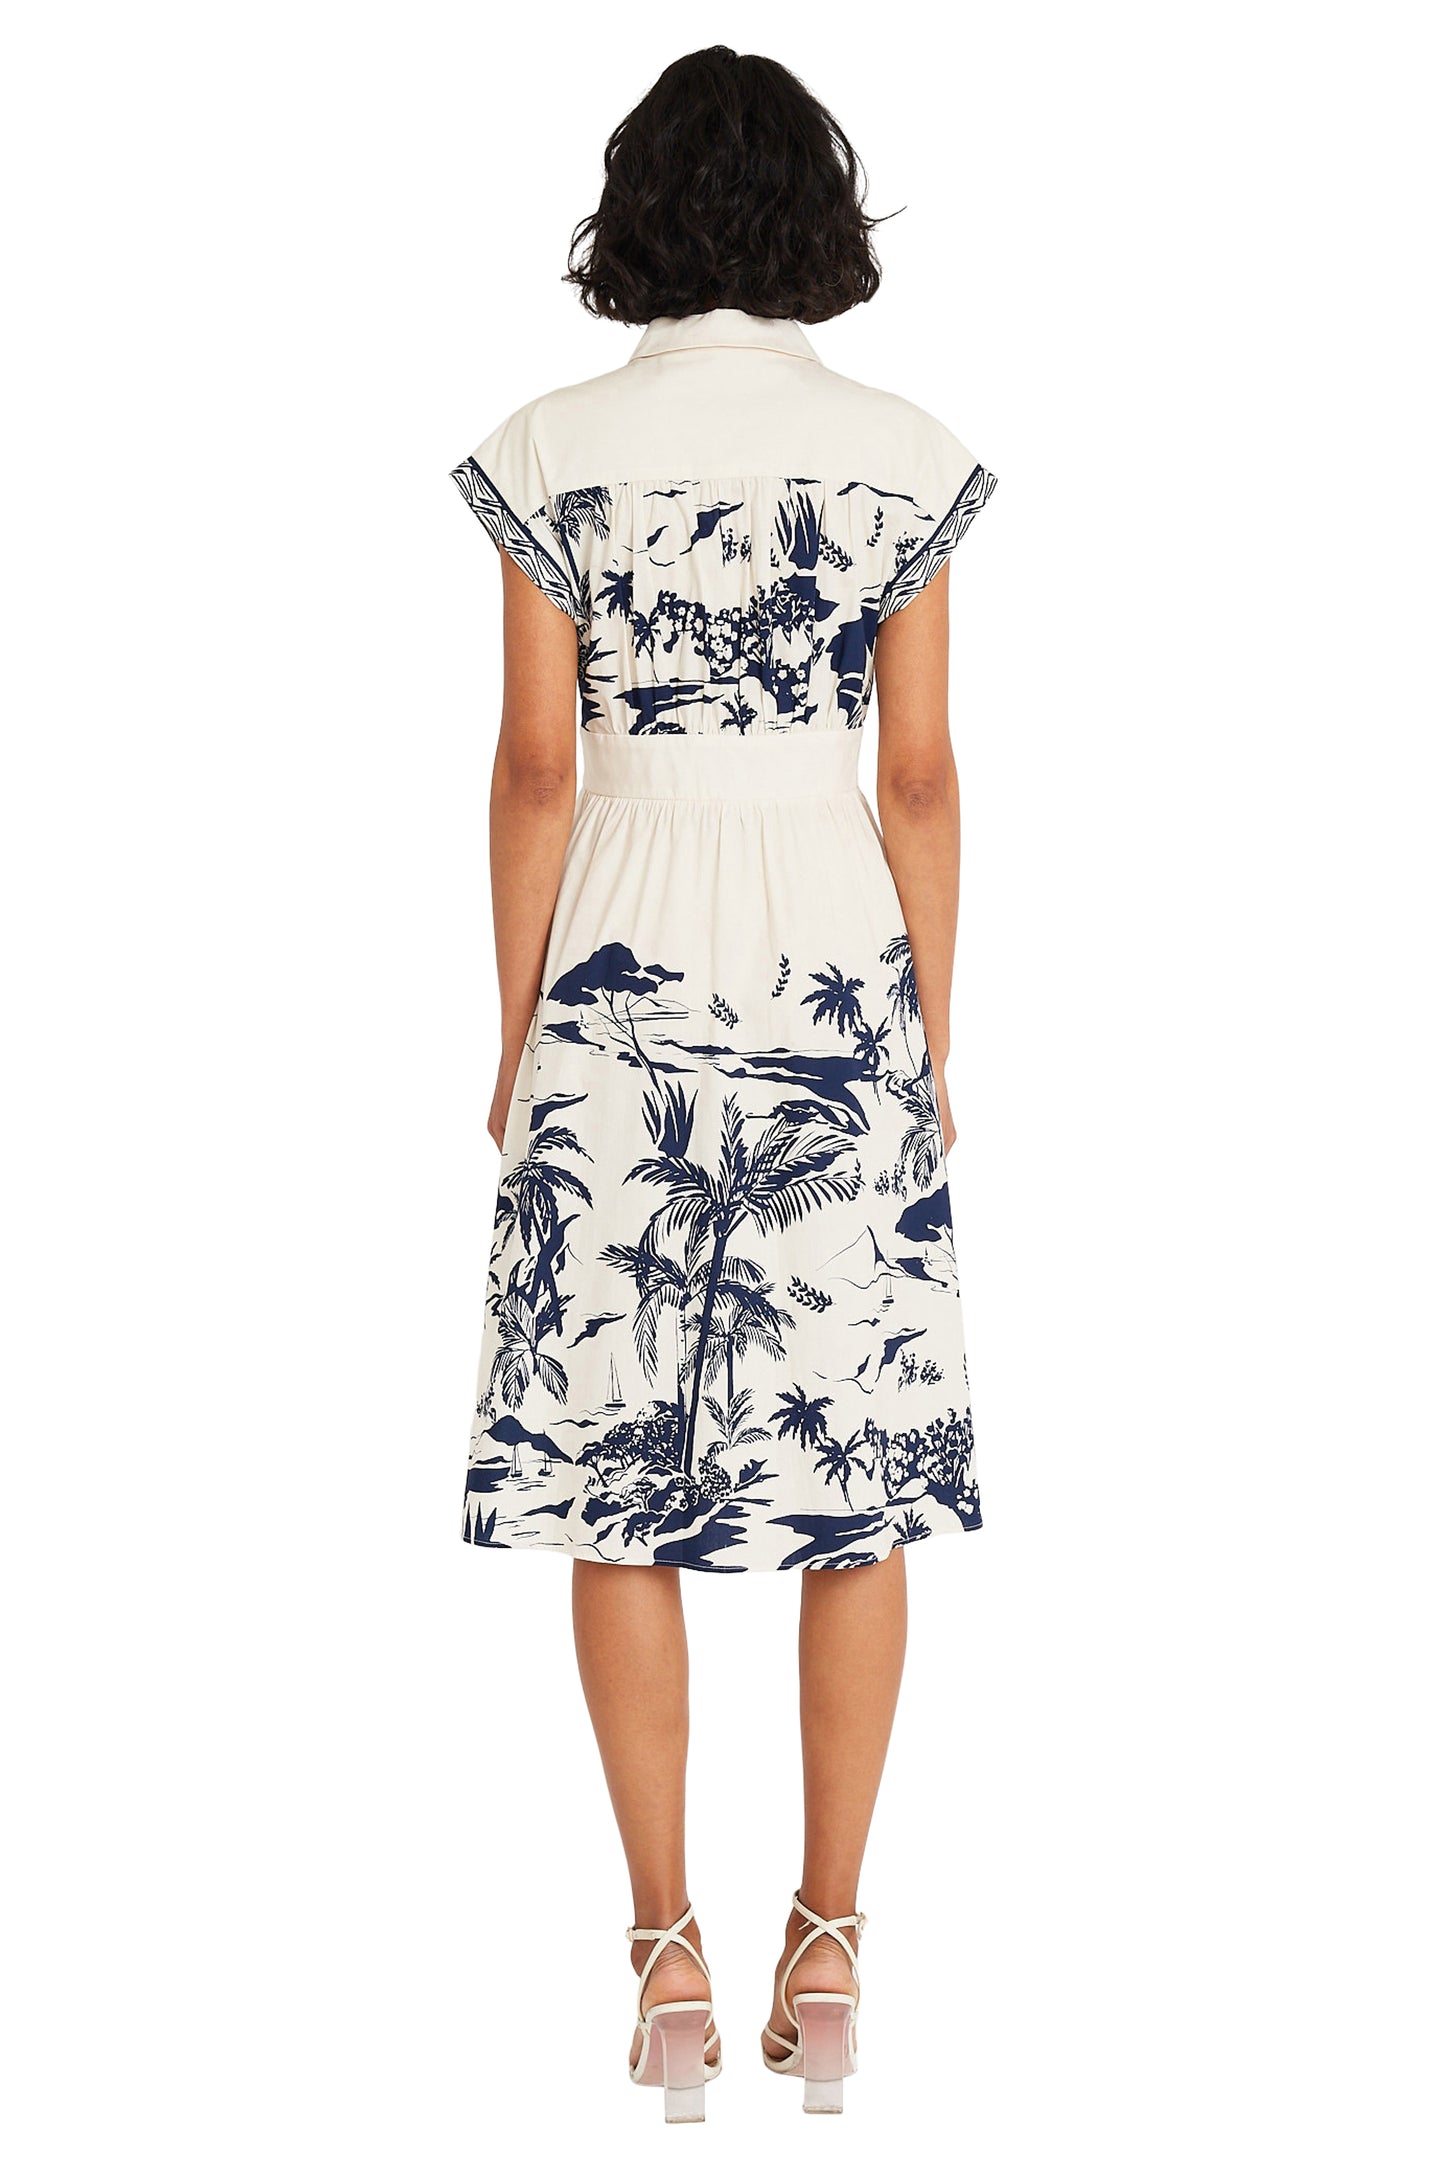 Pacific Rim Print Button Front Dress by Maggy London